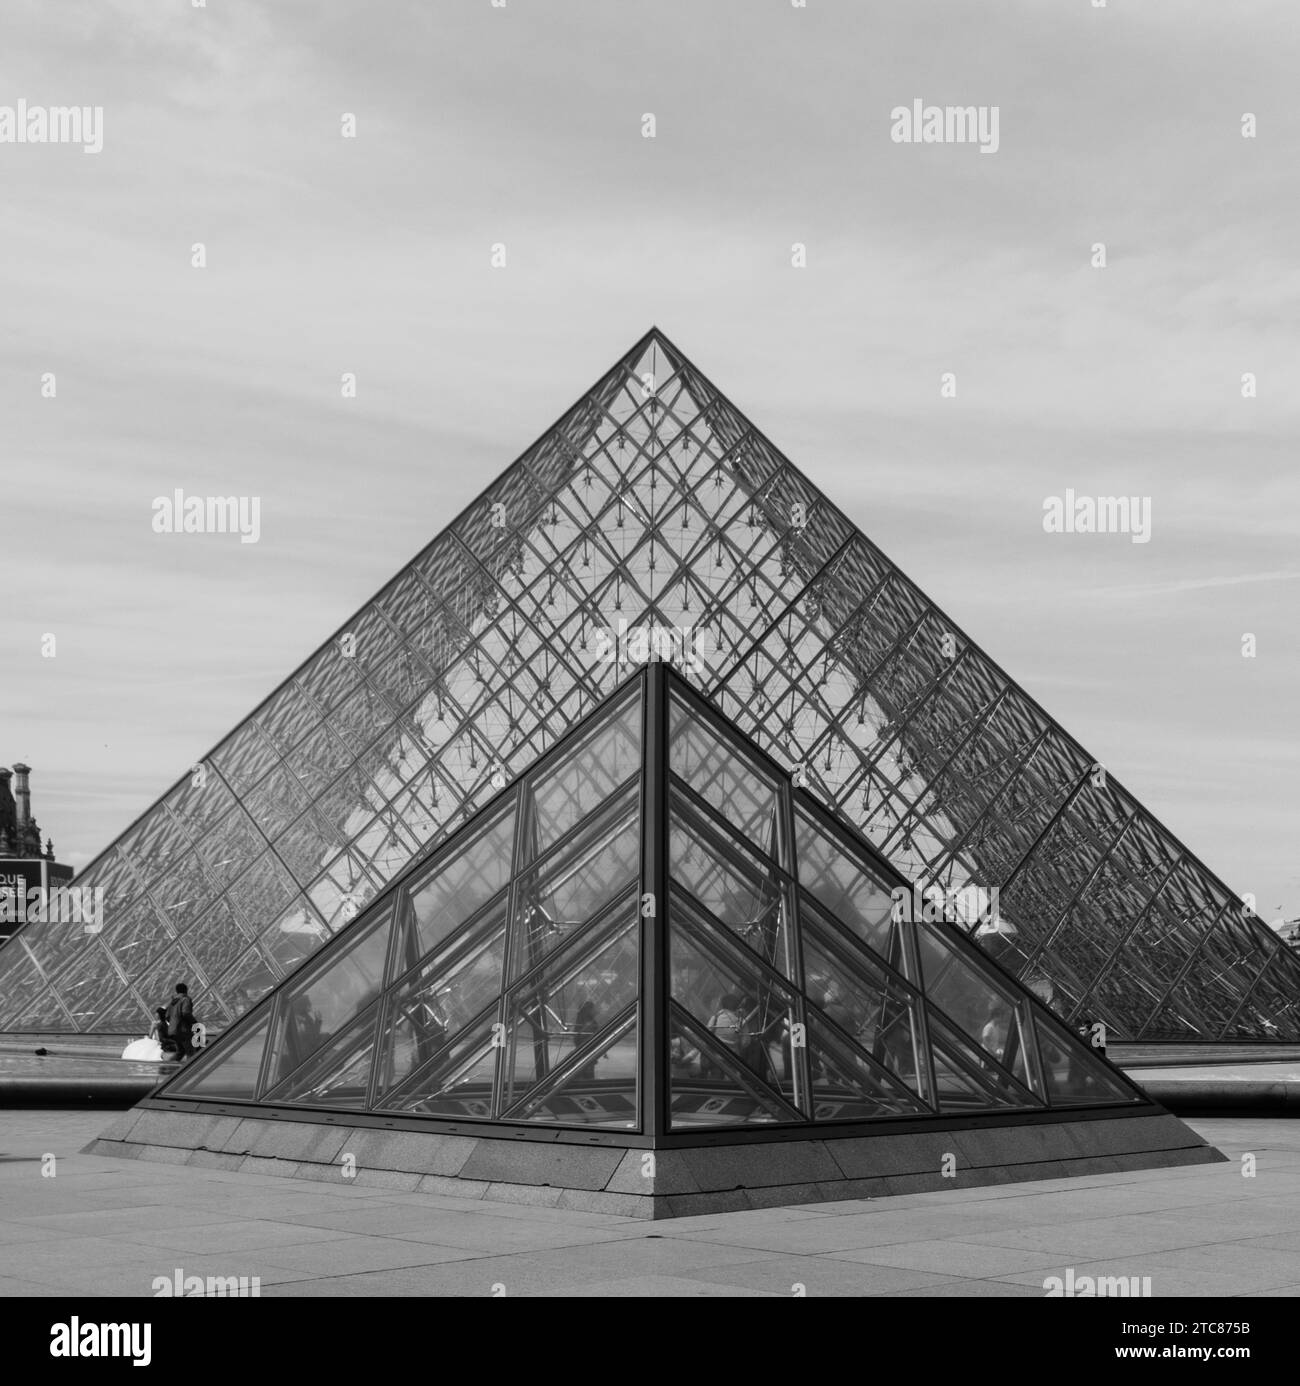 A black and white picture of the iconic pyramids outside the Louvre Stock Photo